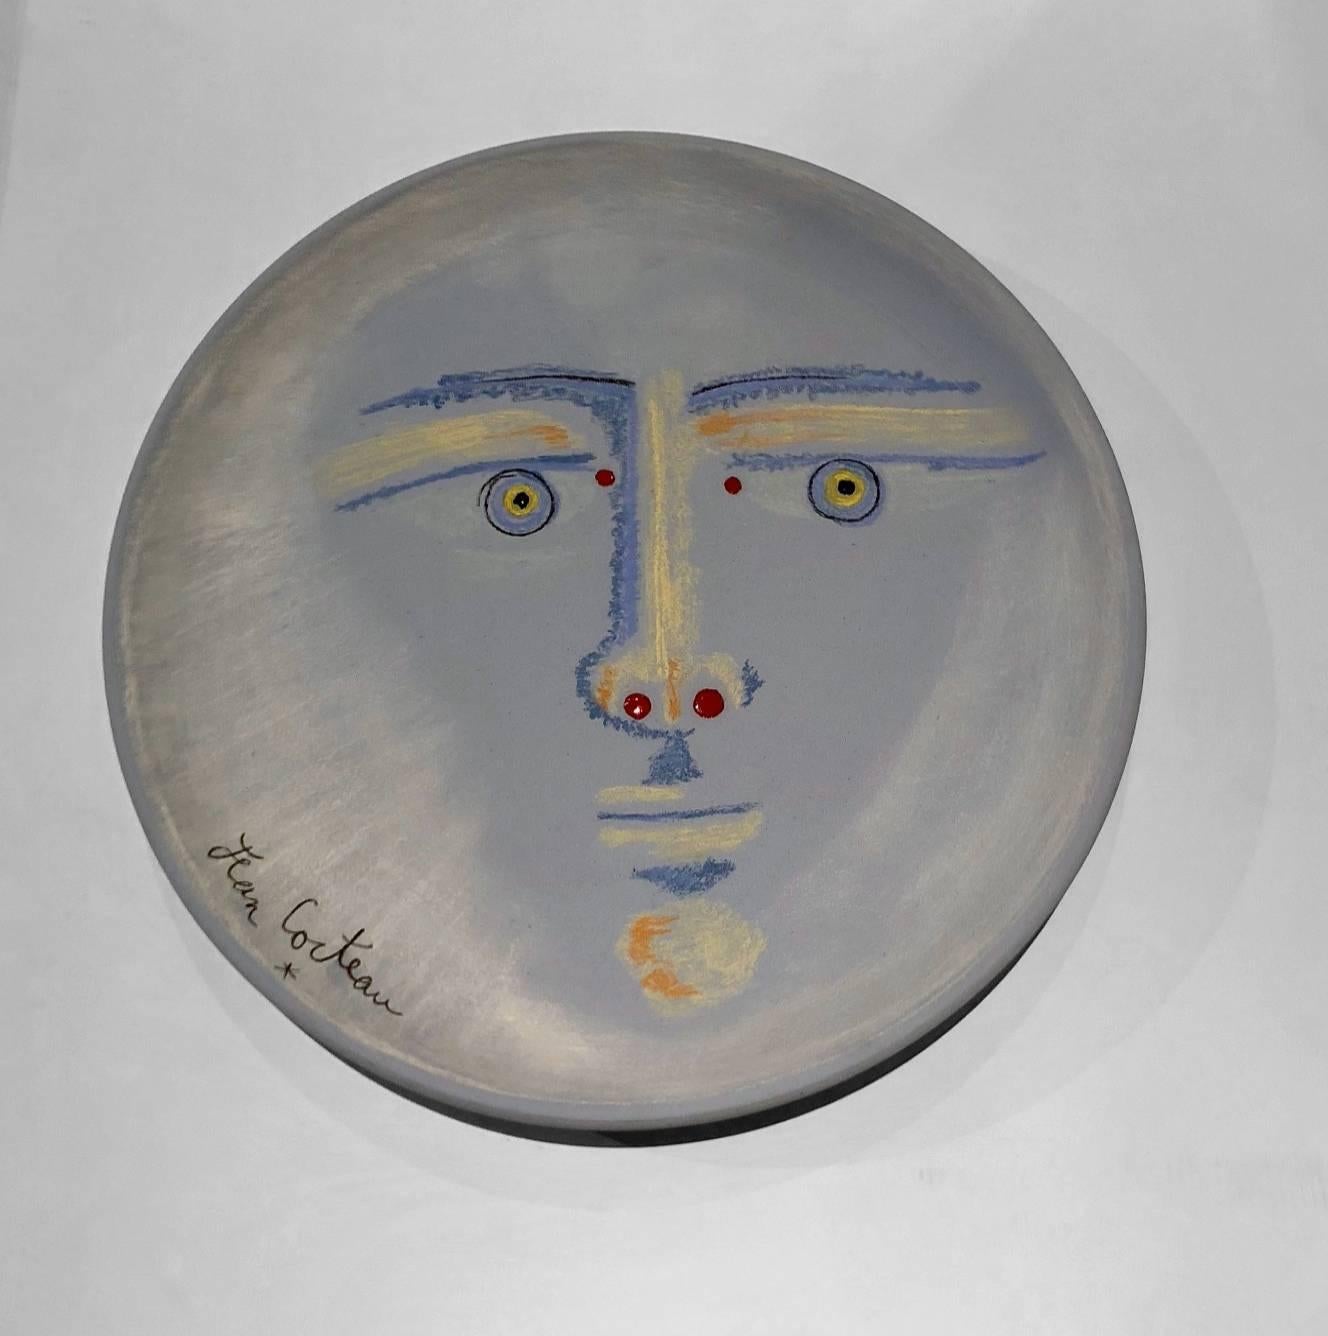 Jean Cocteau ceramic dish clair de lune, 1958

Edition originale madeline and jolly with certificat d'origine, 1958.

Blue earthenware with shiny enamel eyes and nose

N° 15/25 exemplaires.

Jean Cocteau poteries by Annie Guedras p 128.